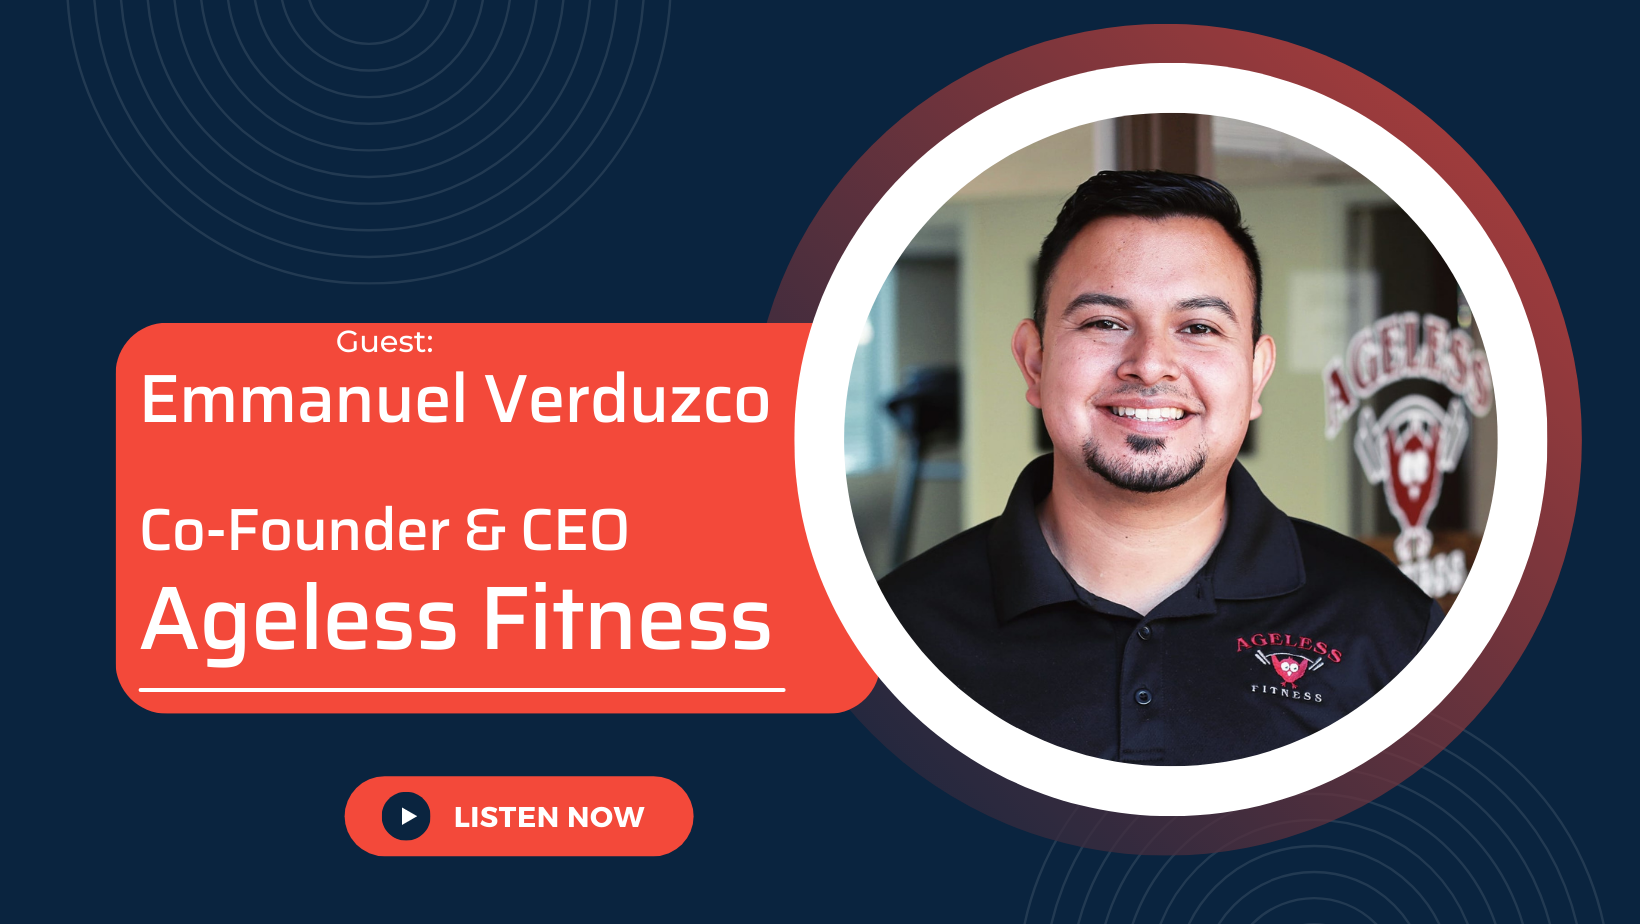 How To Find A Niche & Fill A Need With Your Business with the Co-Founder & CEO of Ageless Fitness, Emmanuel Verduzco